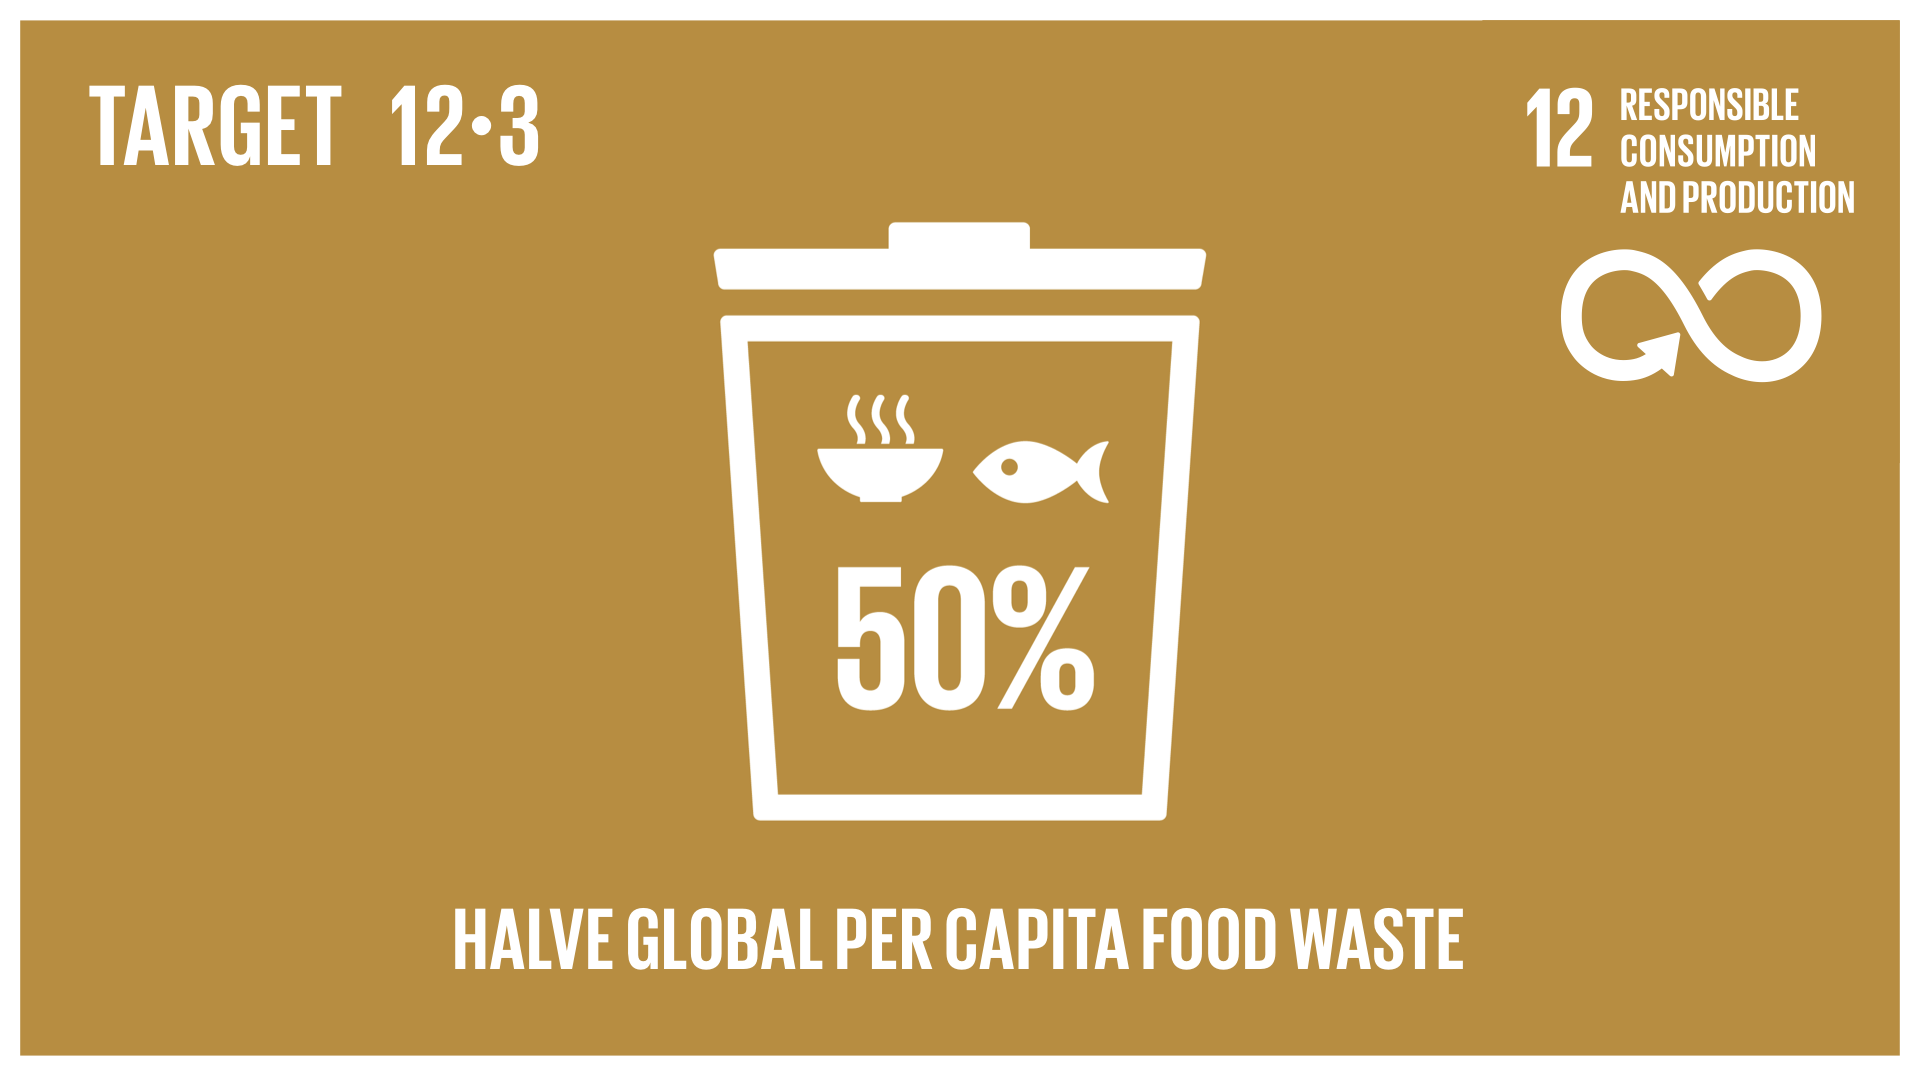 Graphic displaying the halving of per capita global food waste